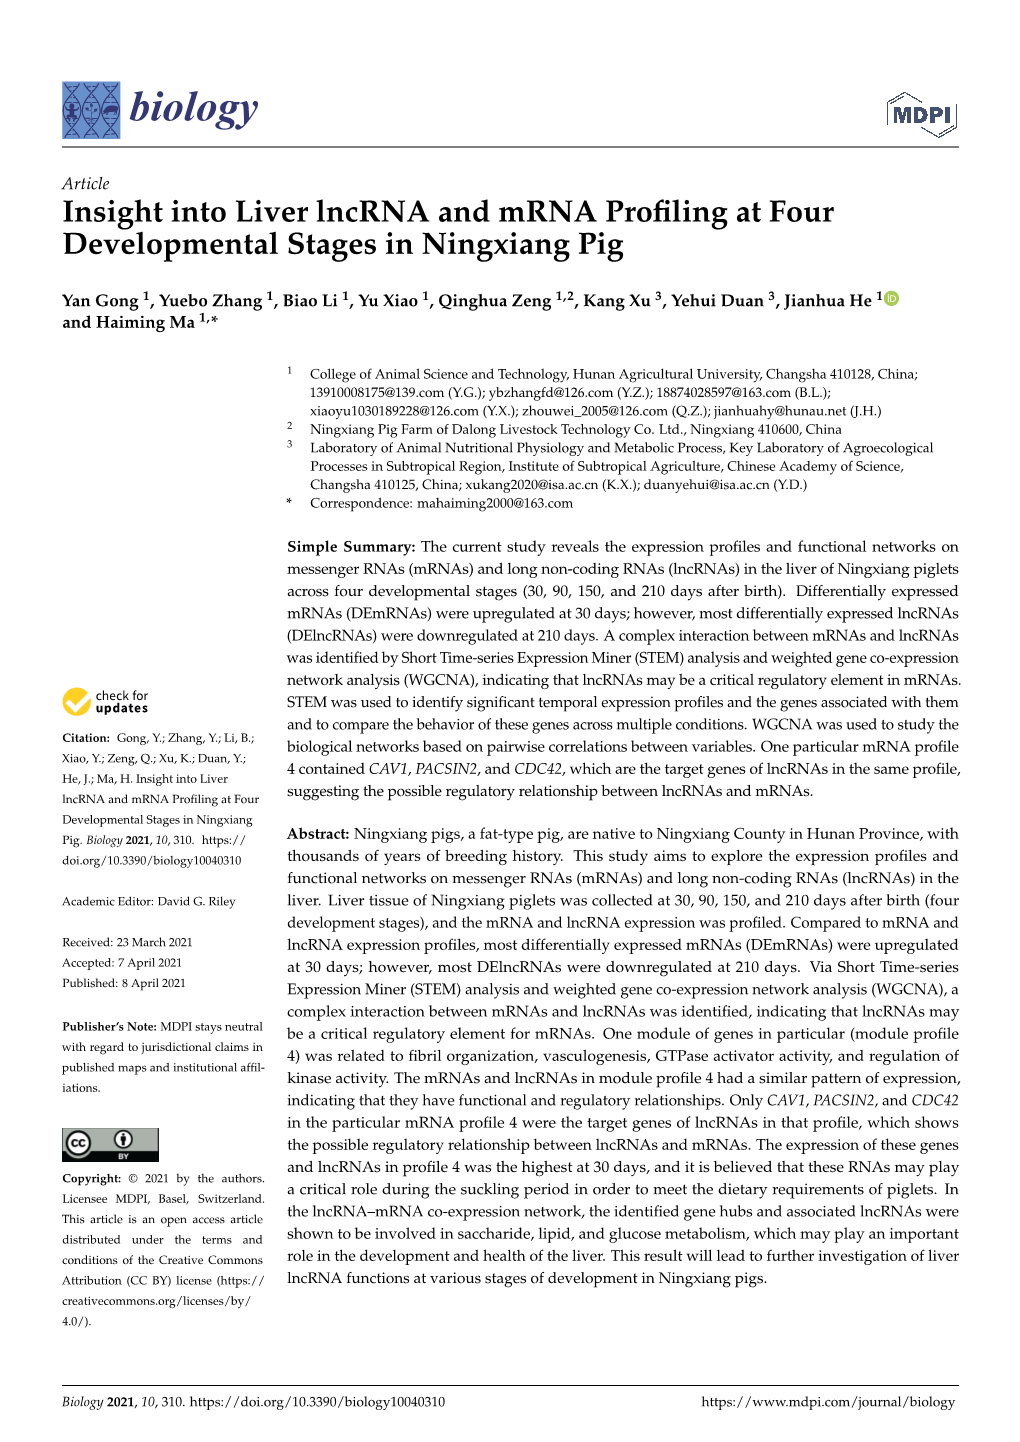 Insight Into Liver Lncrna and Mrna Profiling at Four Developmental Stages in Ningxiang